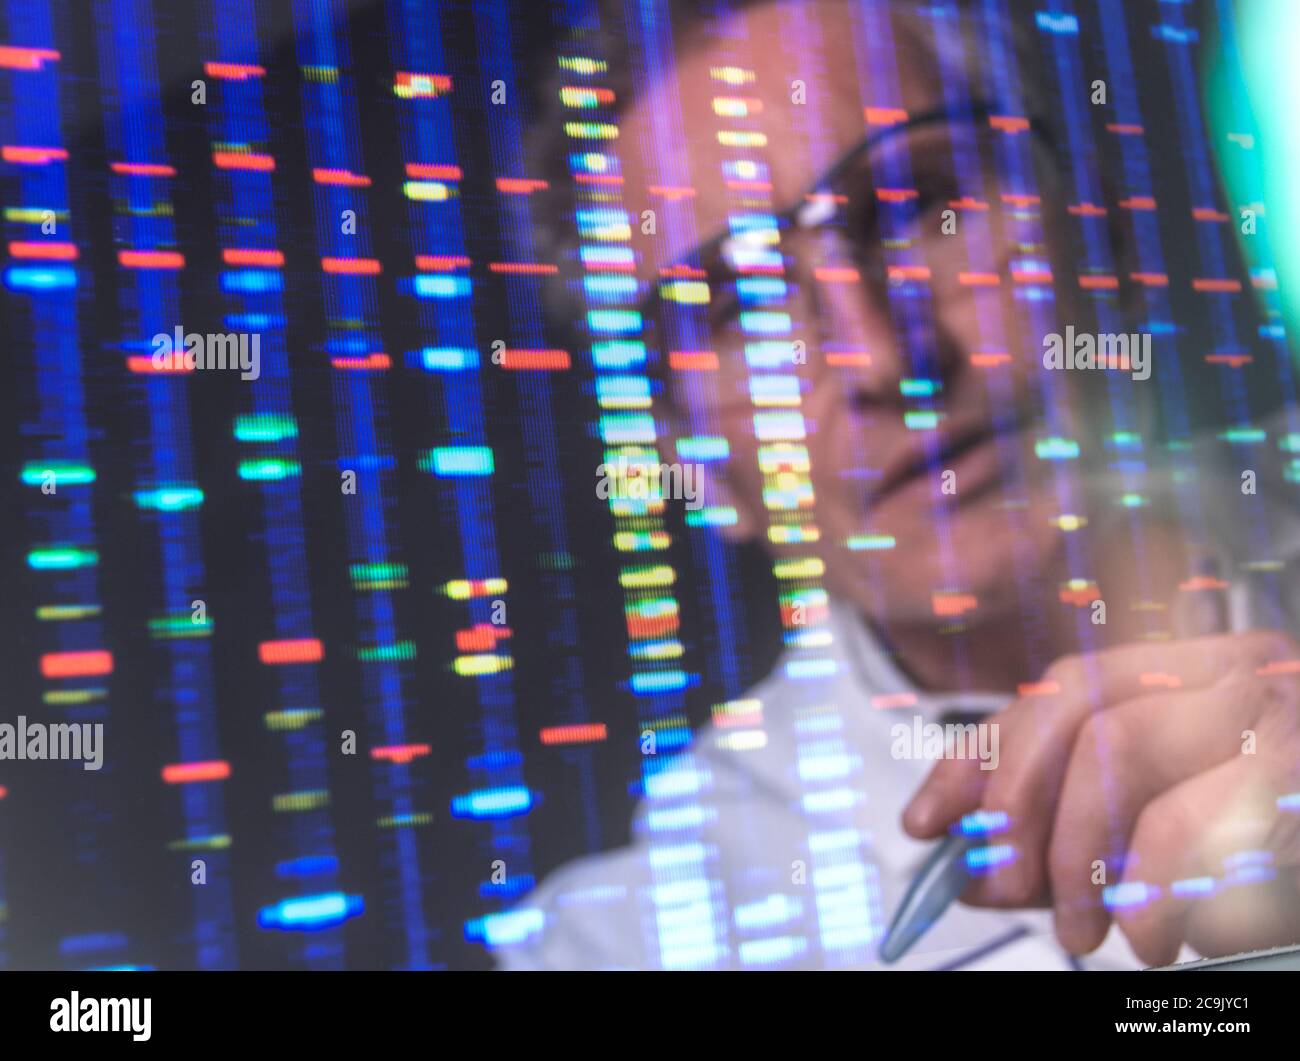 Scientist viewing DNA (deoxyribonucleic acid) profiles on a computer screen. Stock Photo